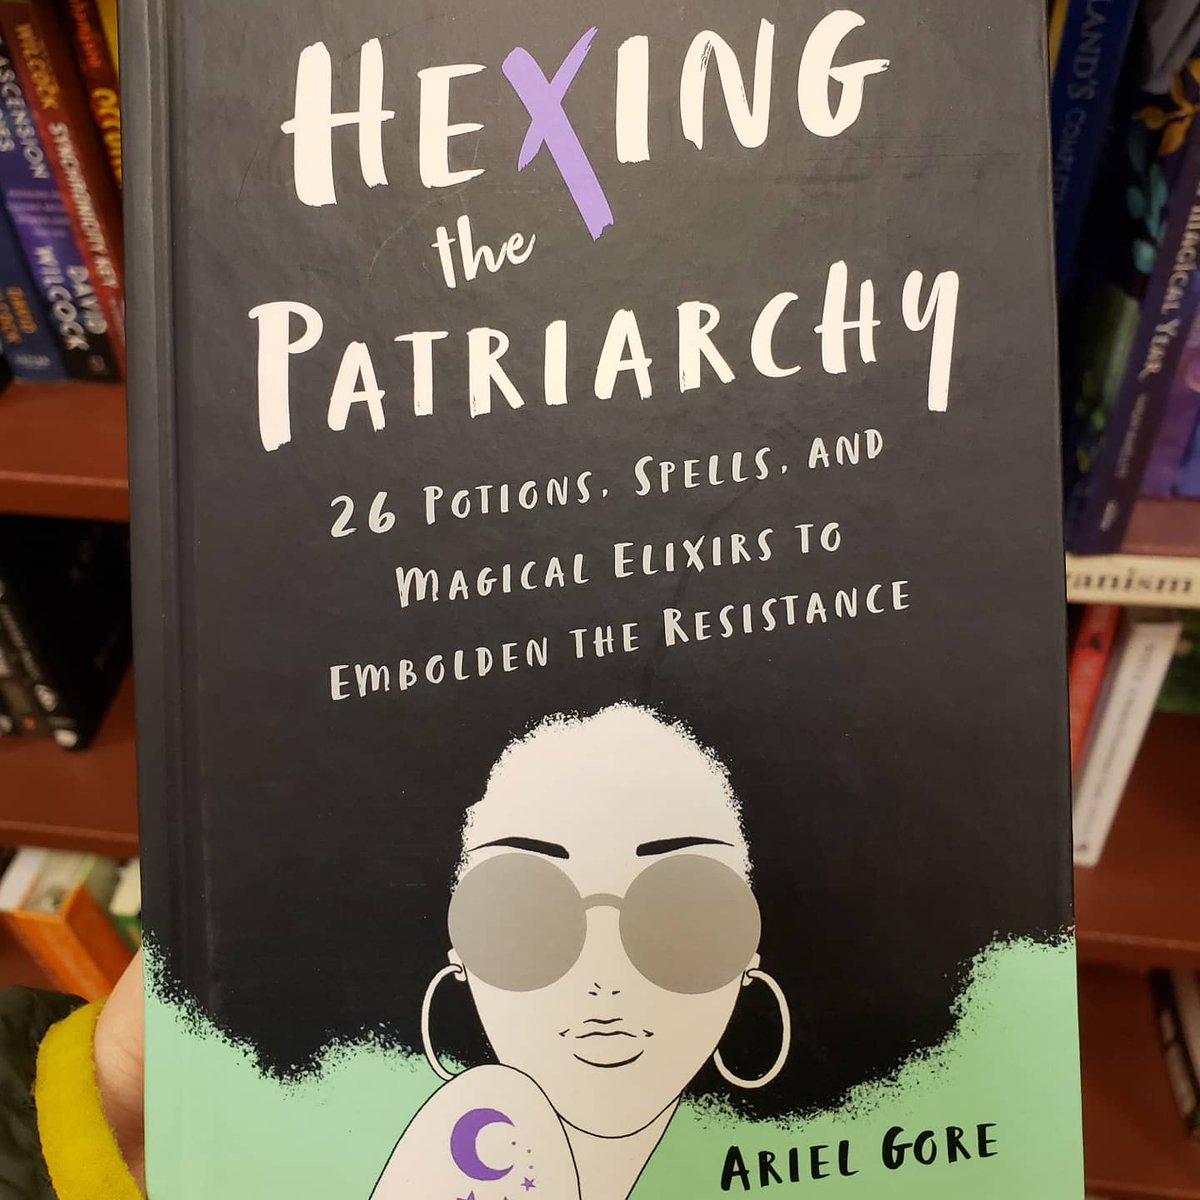 Saw these awesome books today. Didn't buy them, but I appreciated them lol #bitchcraft #witchcraft #hexingthepatriarchy